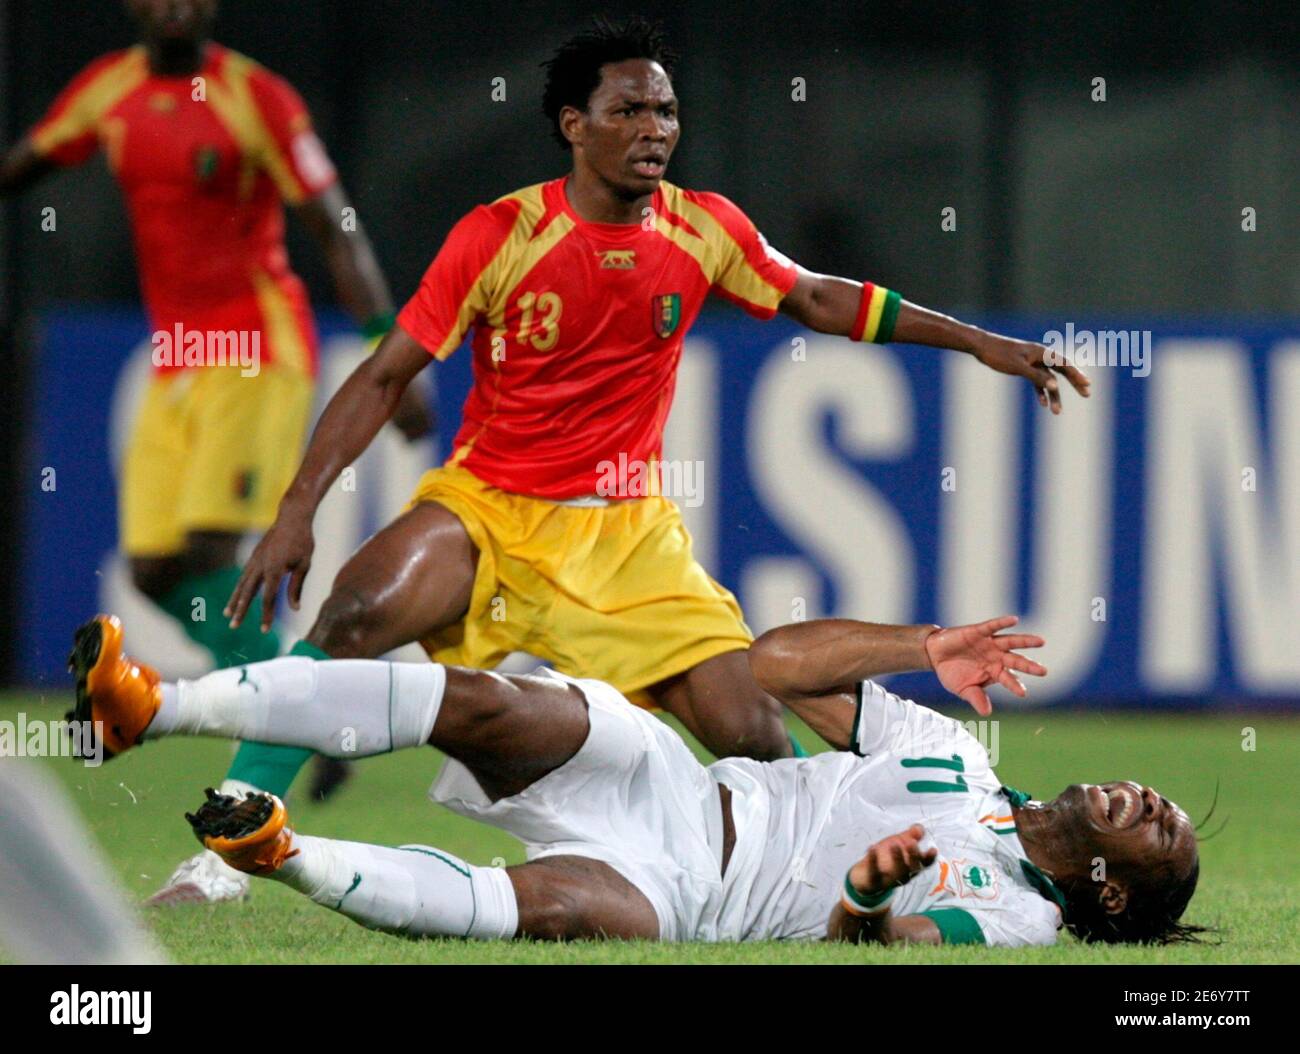 Ivory Coast's Didier Drogba falls after a challenge by Guinea's Mohamed Sacko during their African Nations Cup quarter-final soccer match in Sekondi February 3, 2008. REUTERS/Siphiwe Sibeko (GHANA) Stock Photo